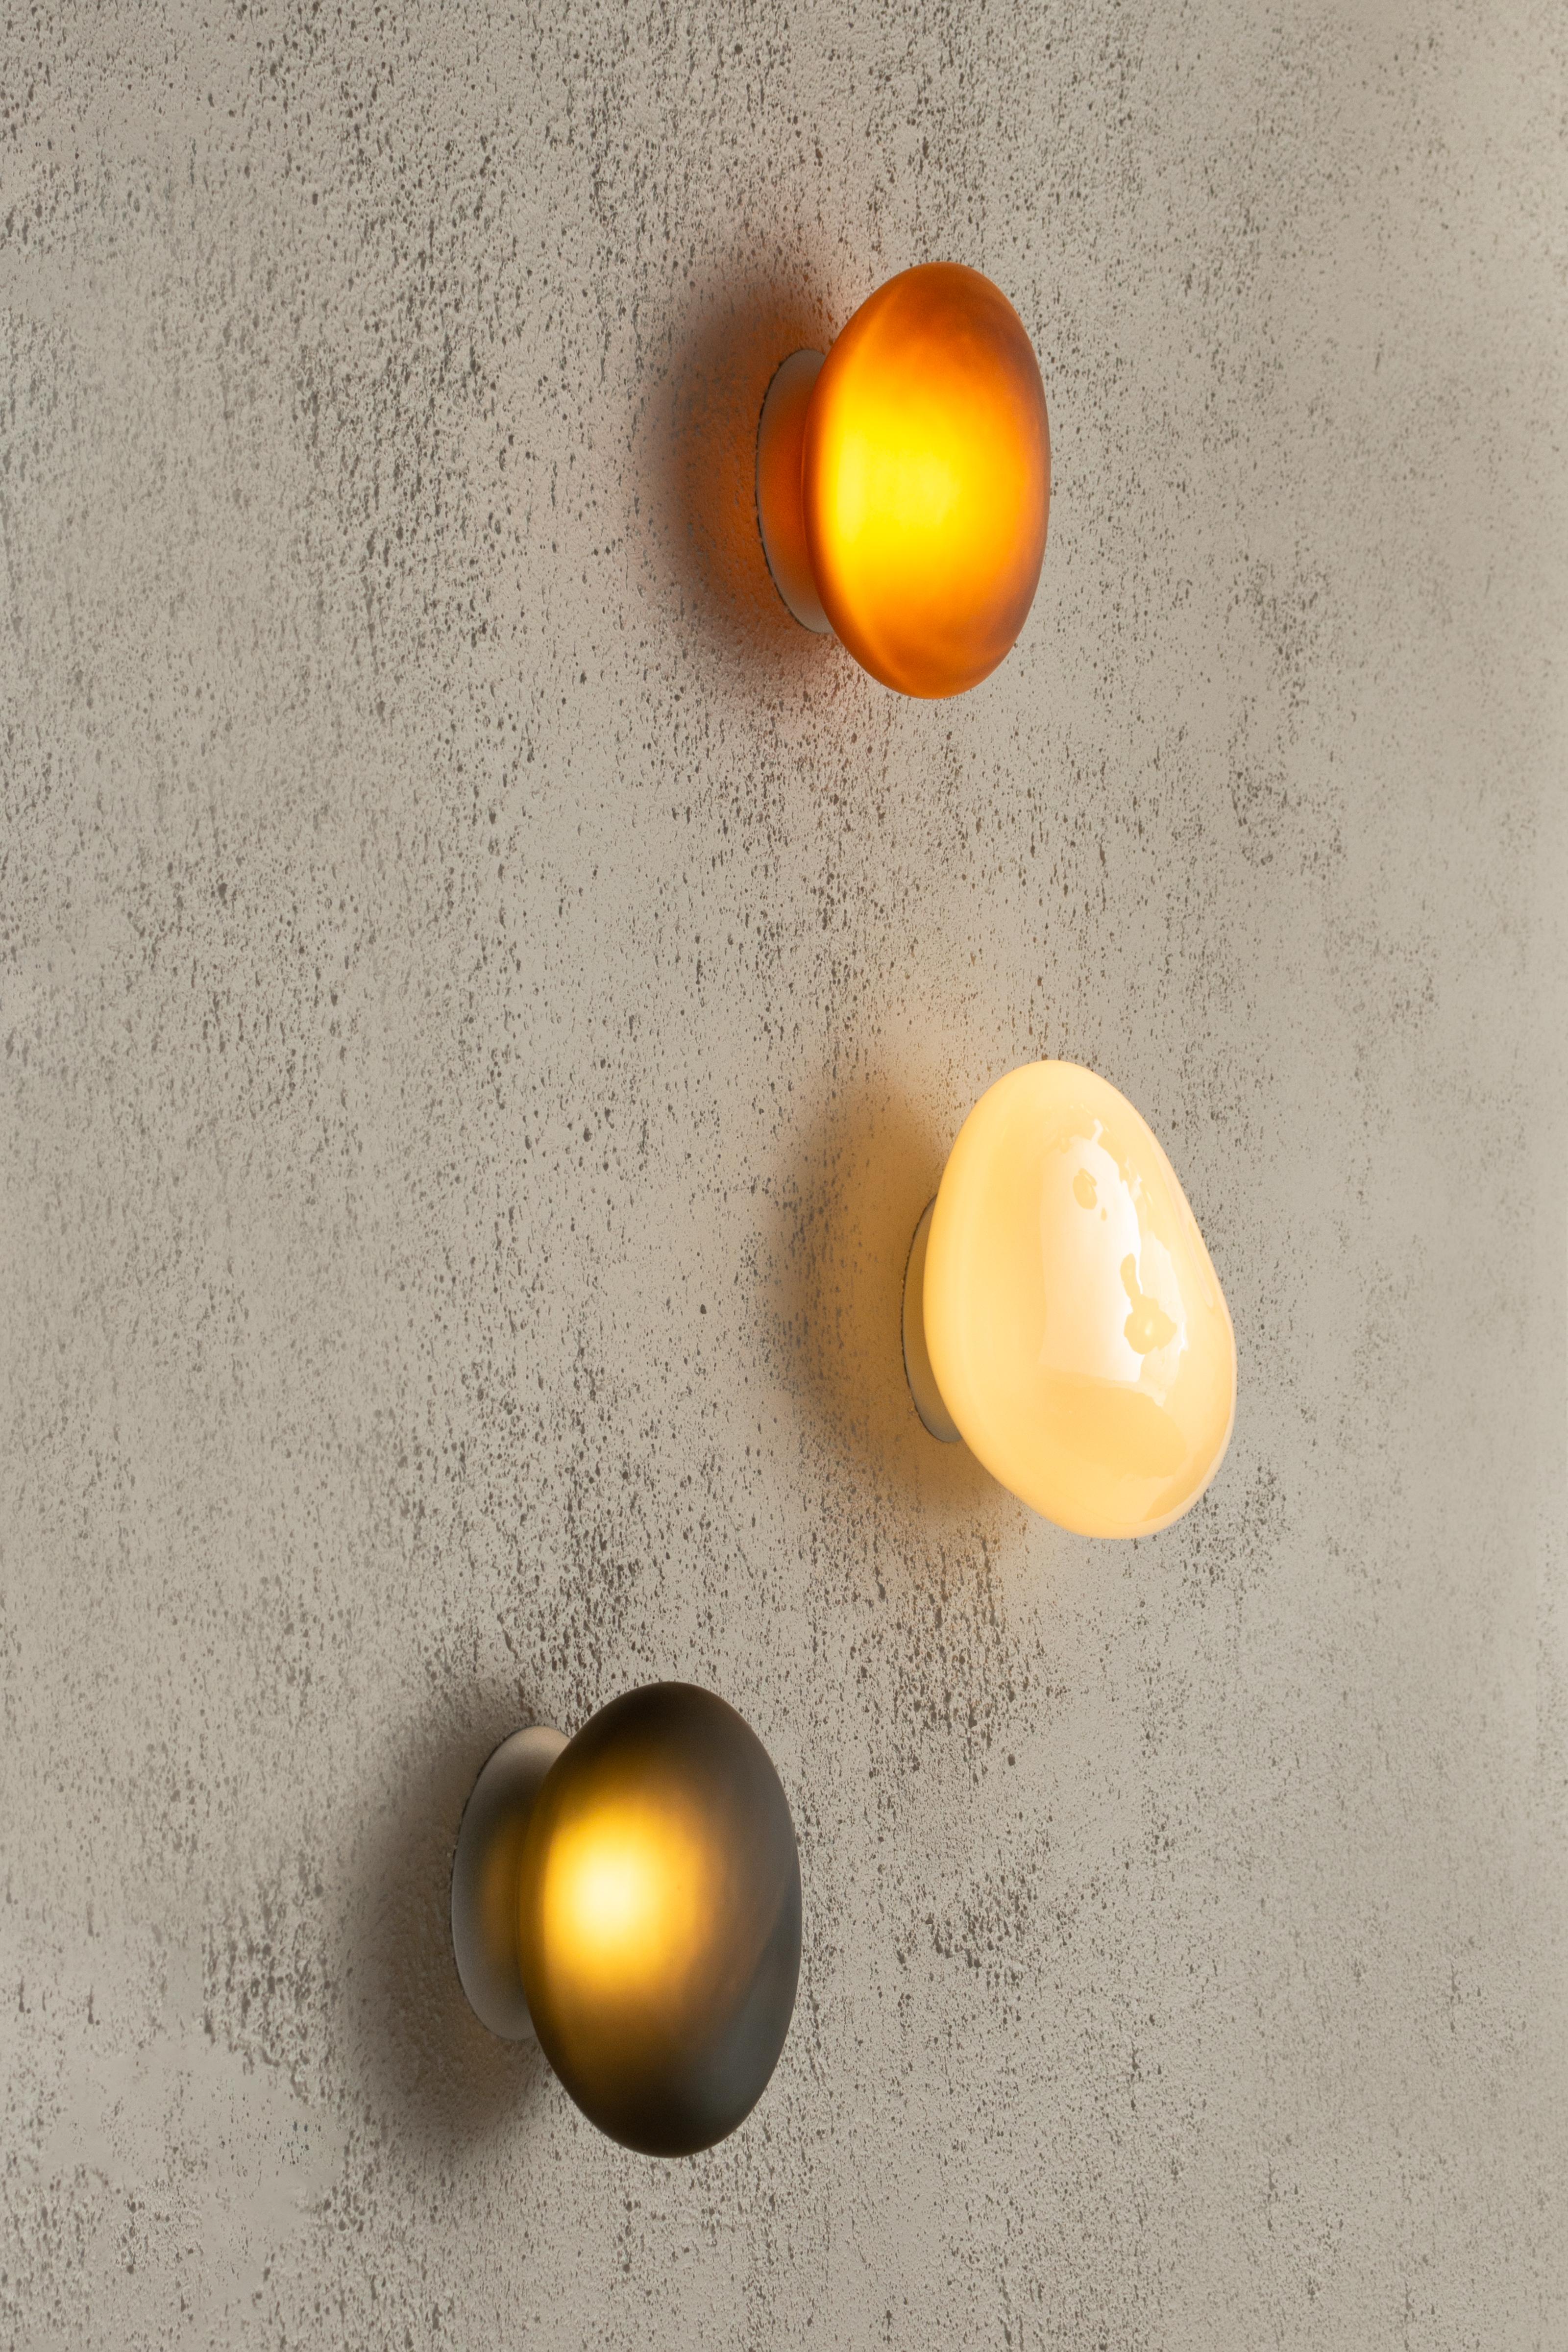 Contemporary wall lamp Pebble 

Electrical : 
Voltage: 110 – 277V / 220 – 240V
Integral LED source : 1 x 4W LED

The model shown in picture:
Dimensions: C: 23 x 20 x 10 cm 
Color: Pearl white
______
Pebble
The Pebble series celebrates the